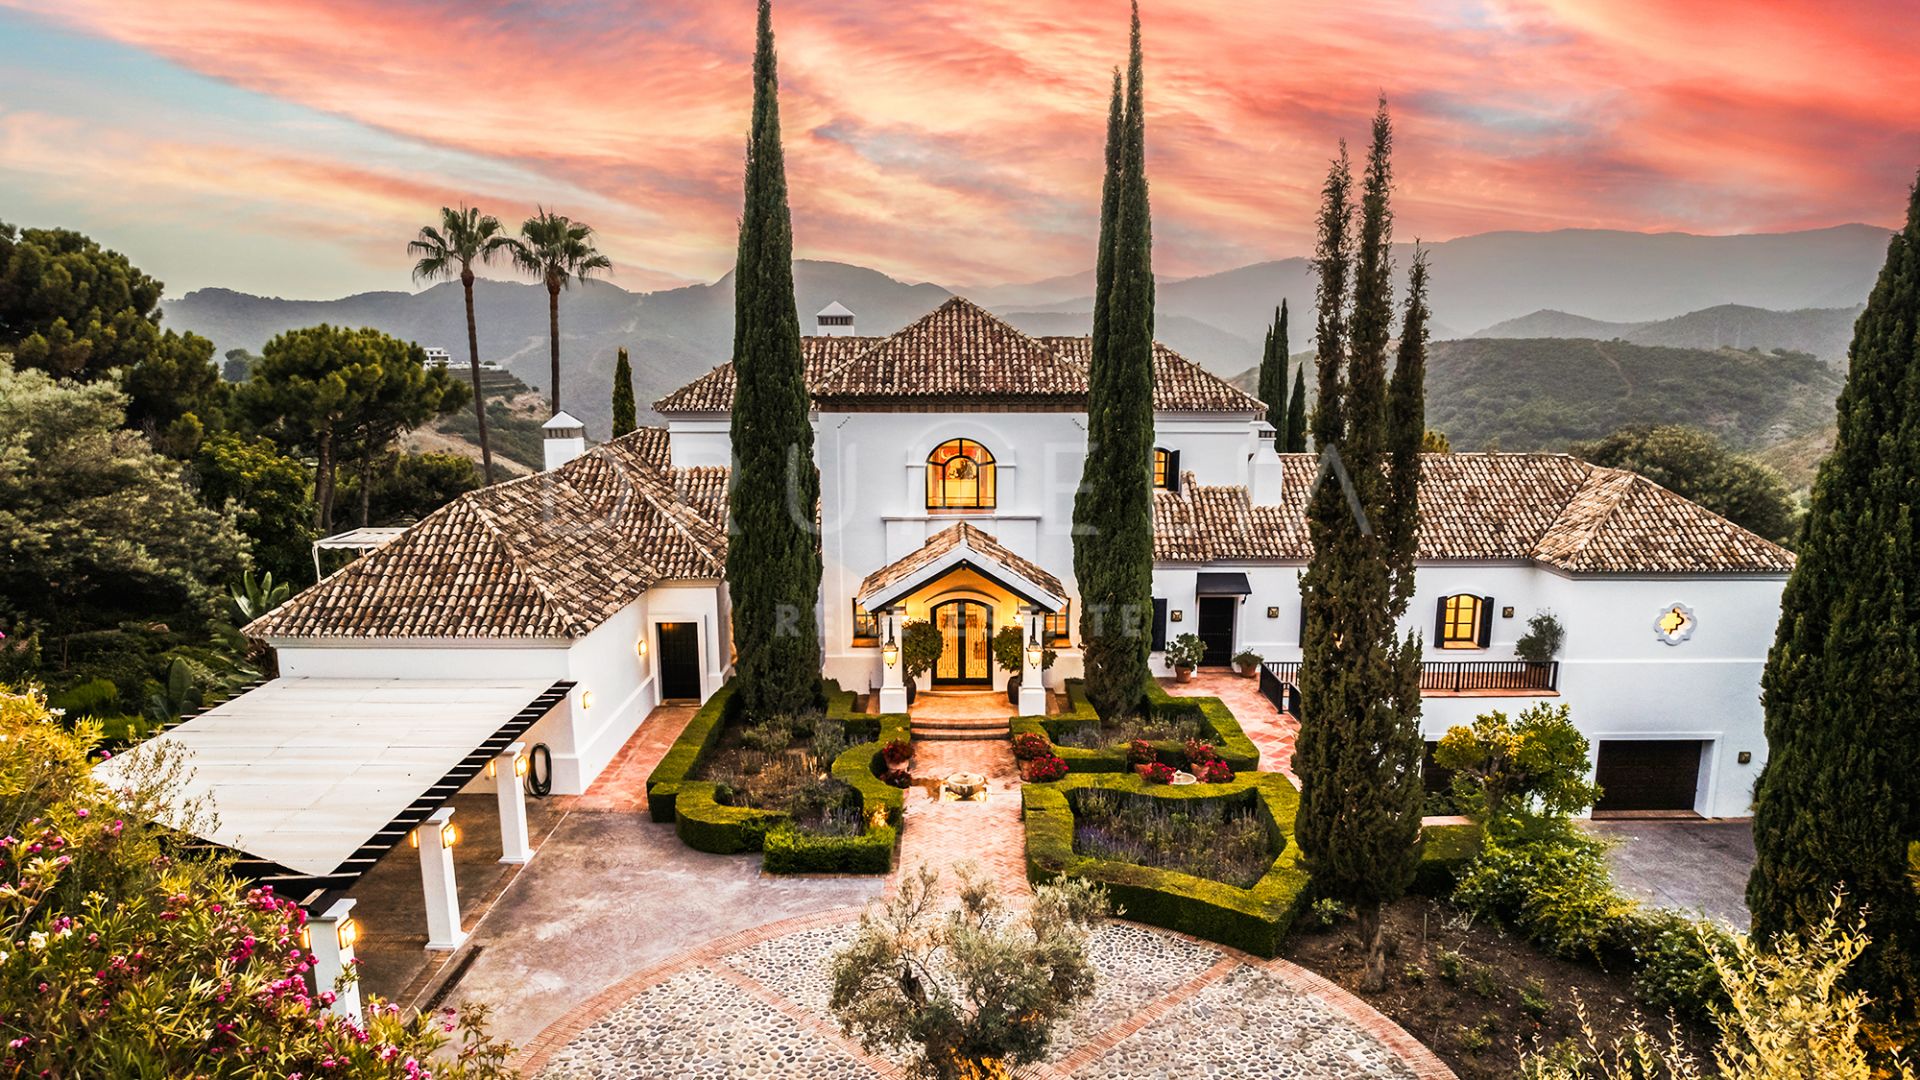 Casa Terregles - High-end mansion with Andalusian charm, panoramic views and luxury amenities in La Zagaleta, Benahavis